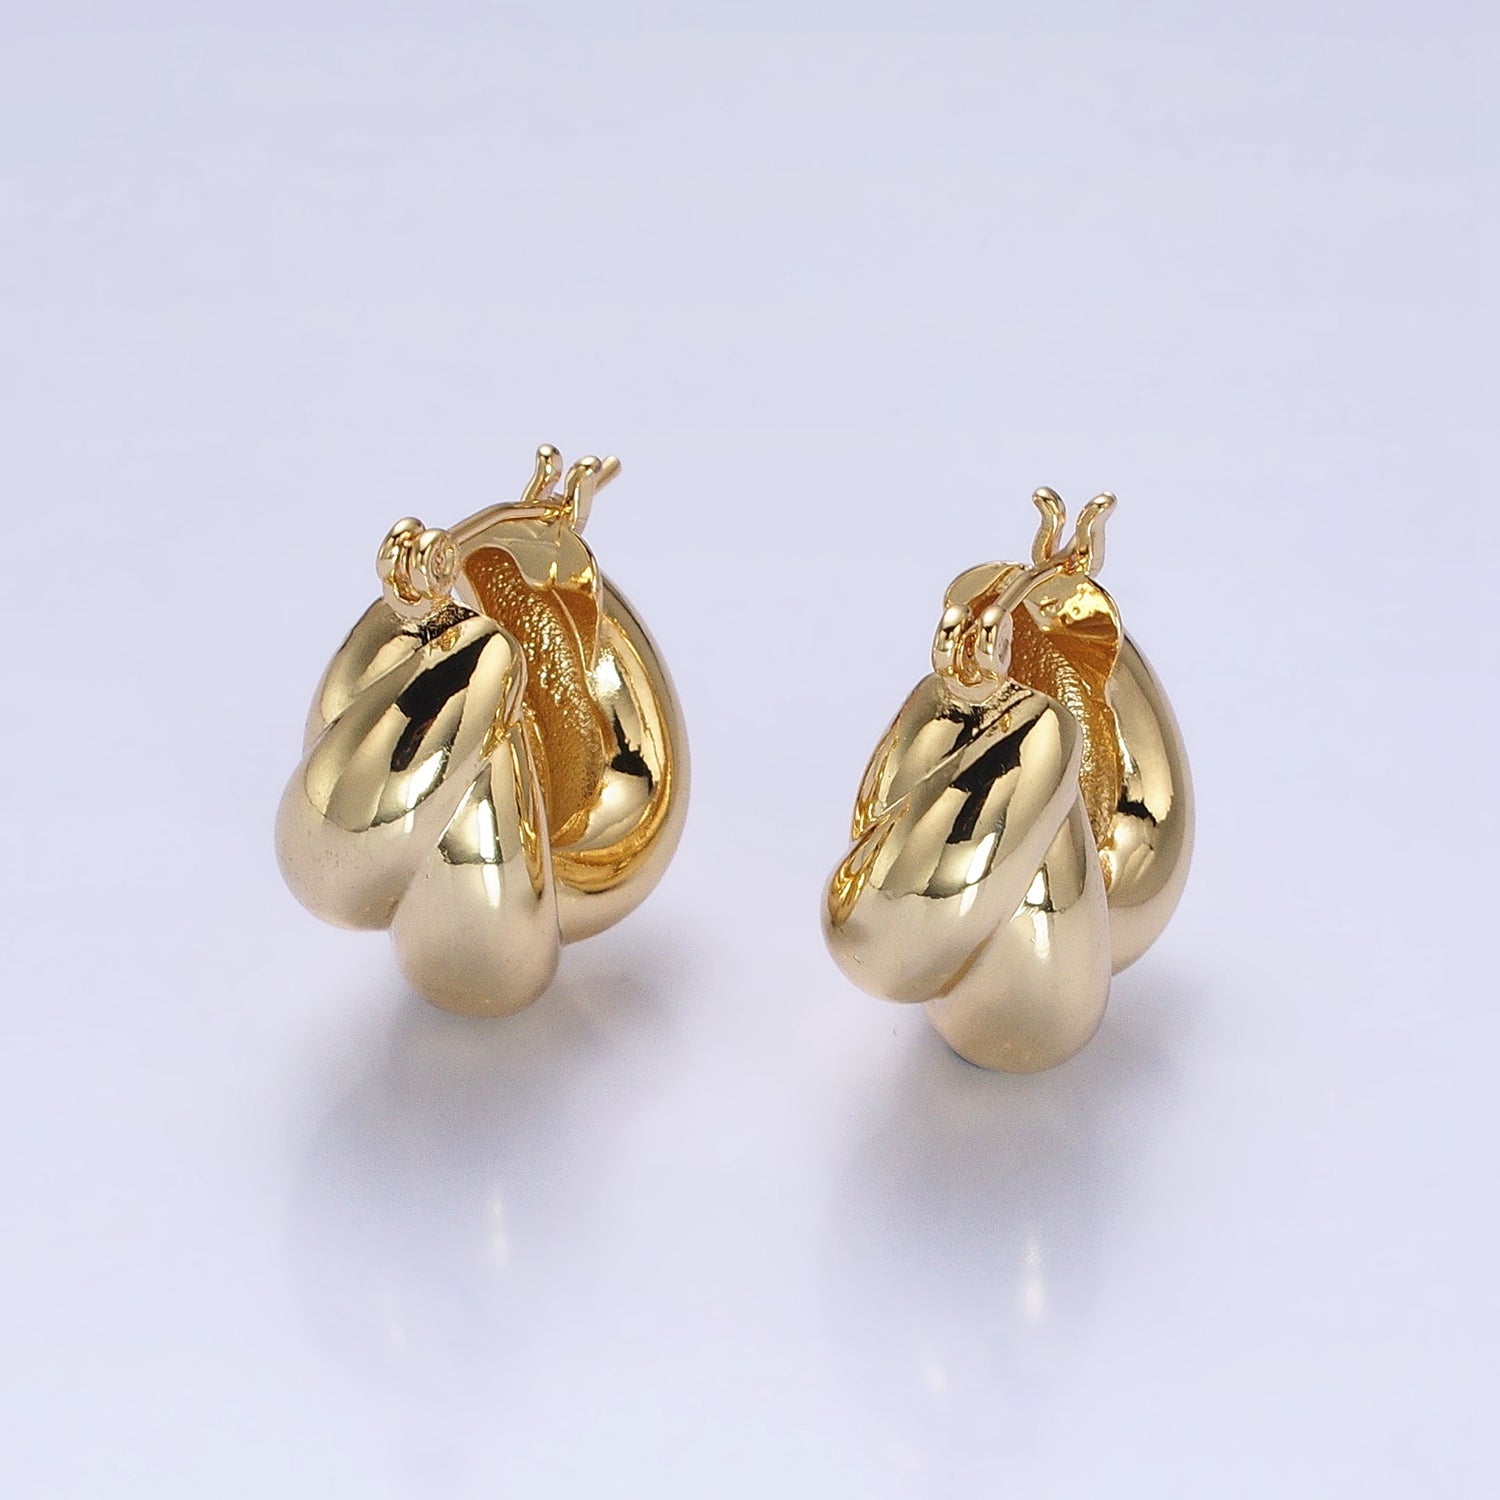 24K Gold Filled 21mm Dome Croissant Latch Earrings in Silver & Gold | AB-1429 AB-1432